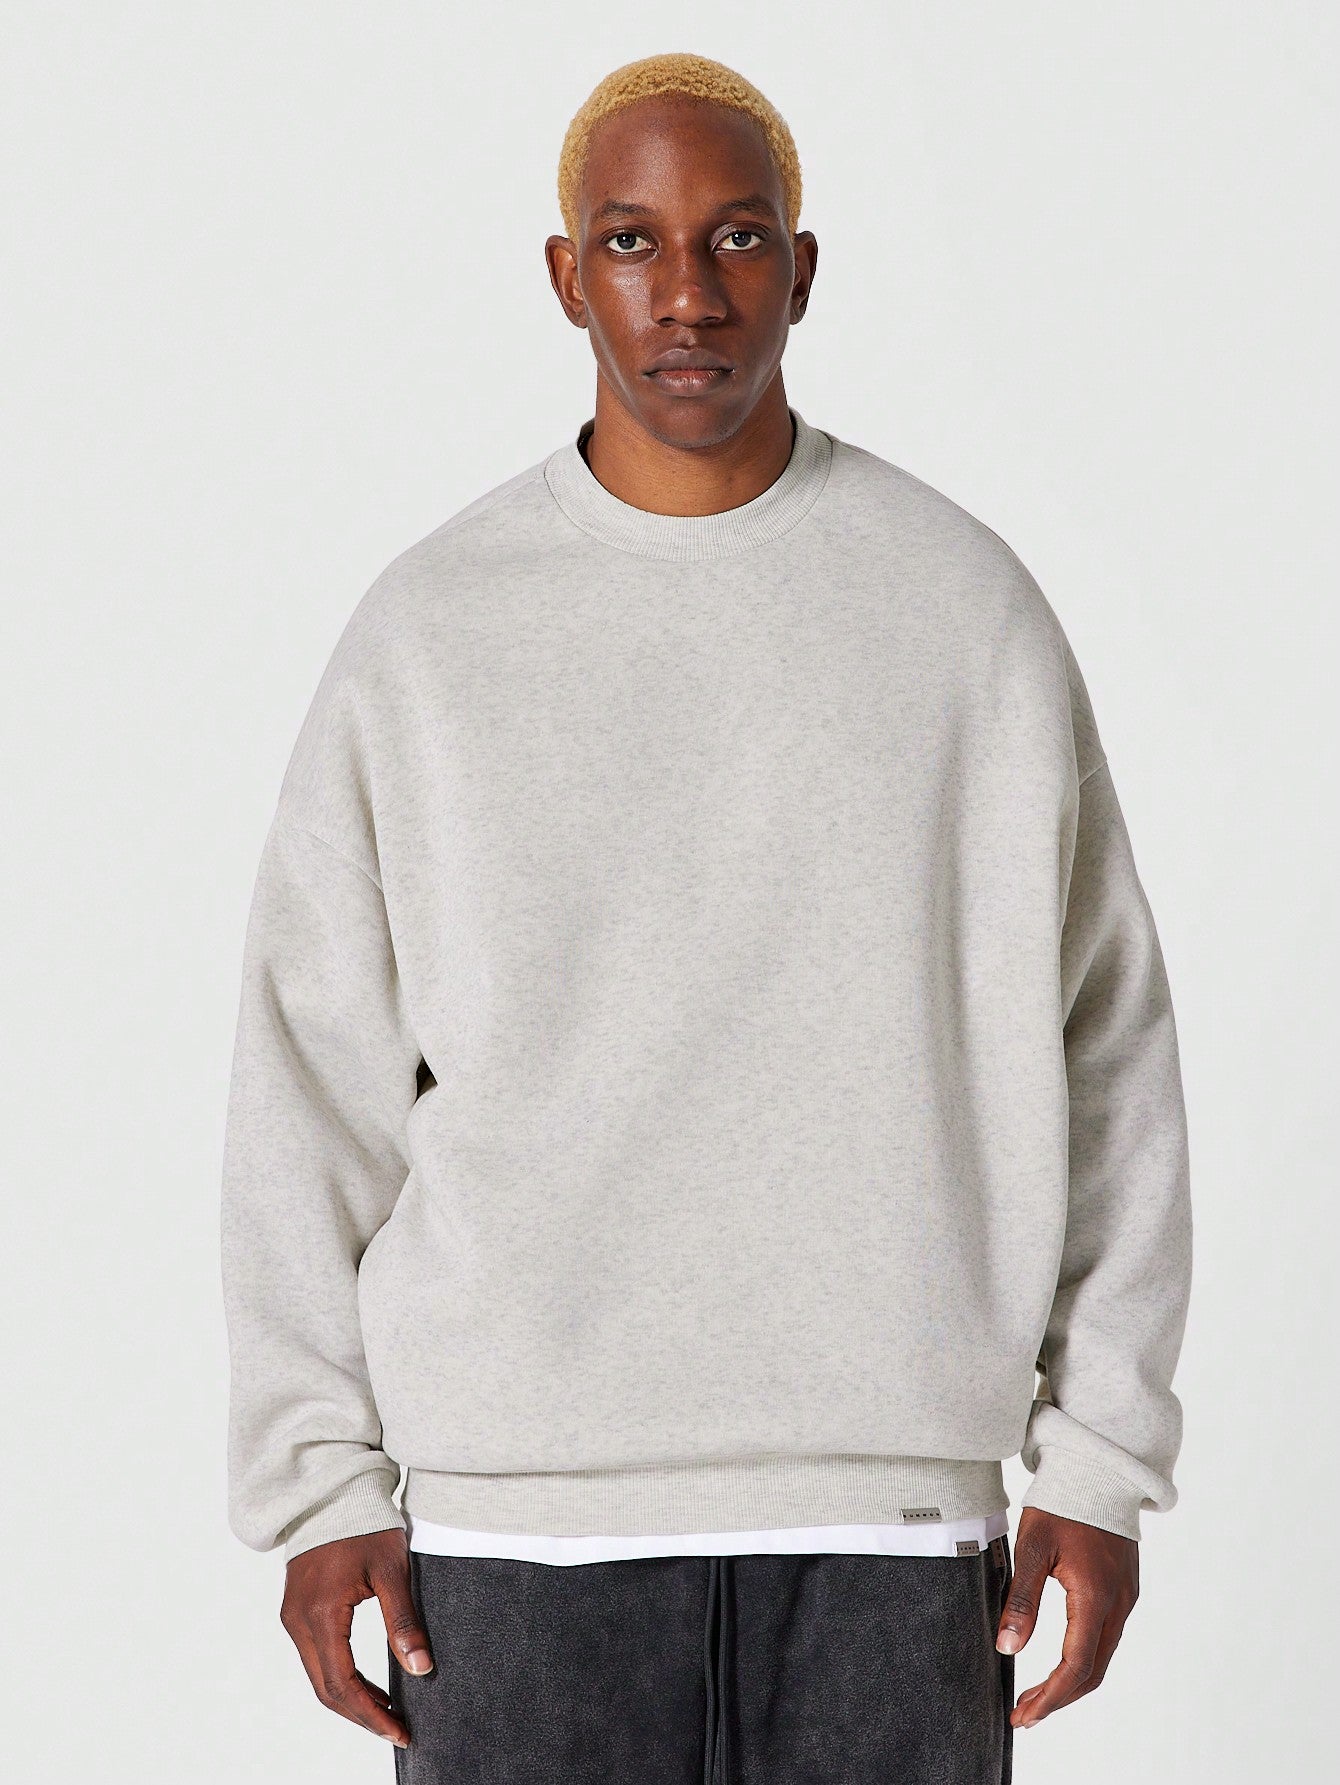 Oversized Fit Sweatshirt With Side Pockets